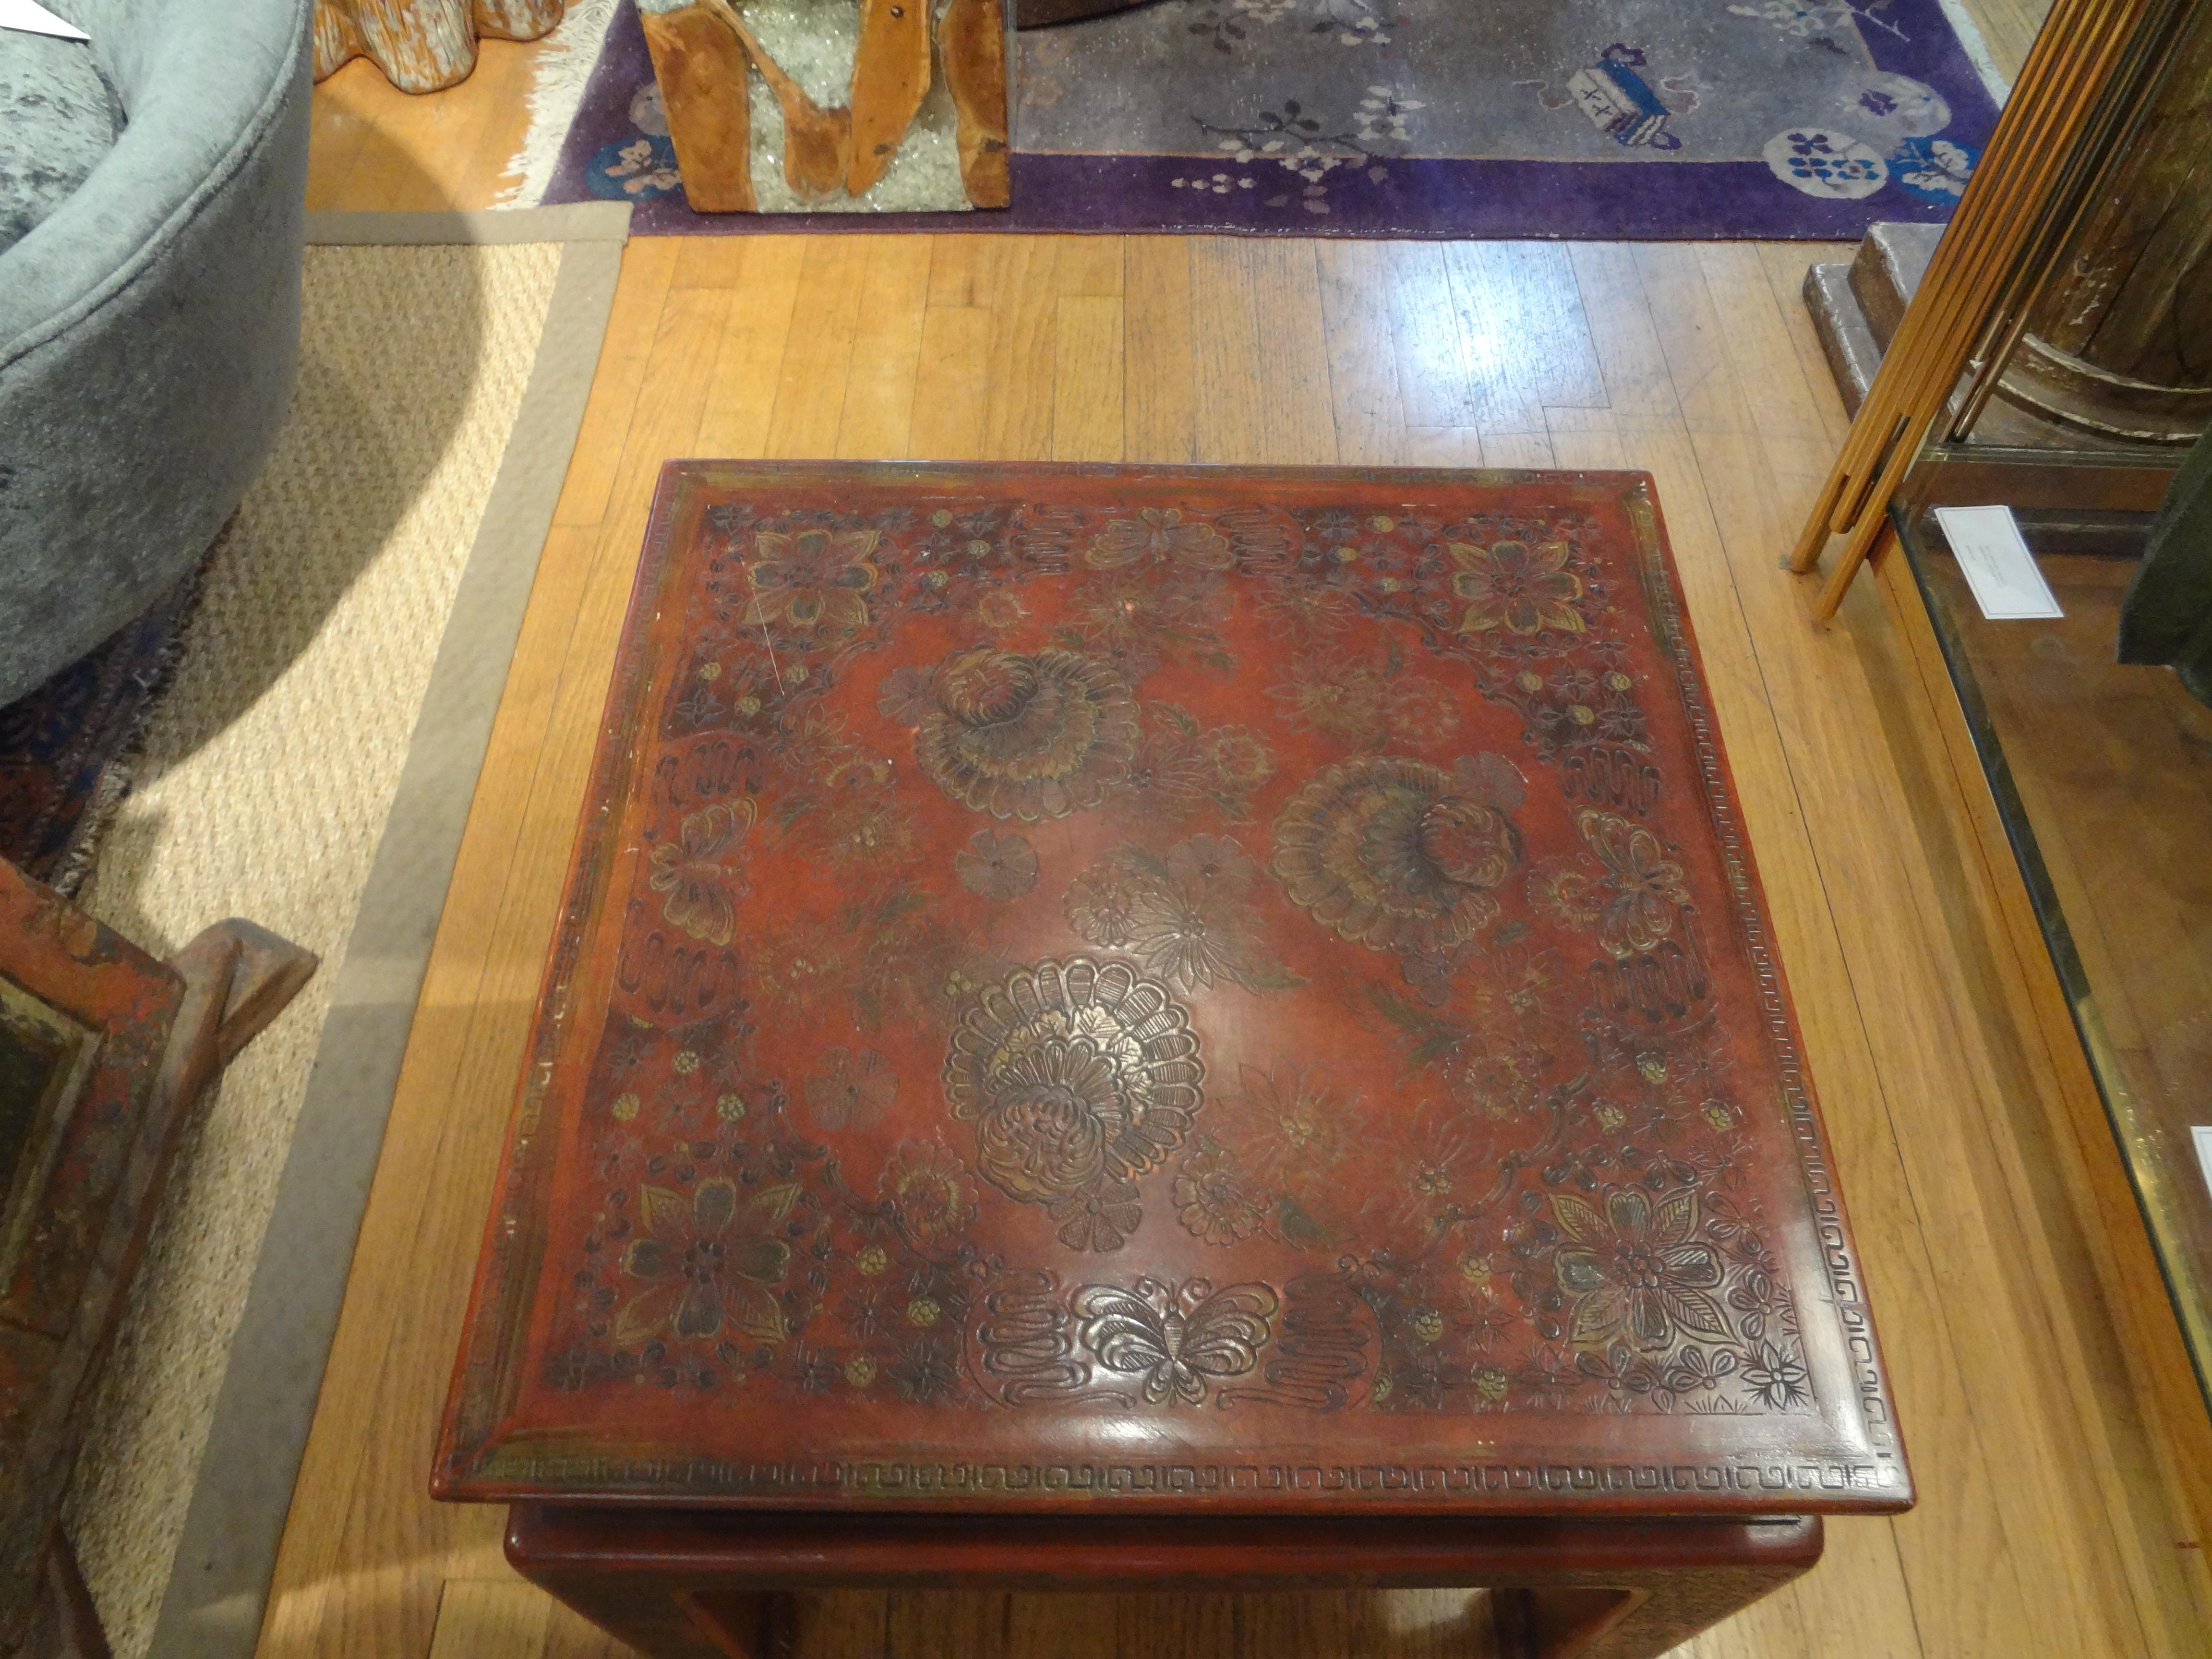 North American Asian Modern John Widdicomb Square Lacquered Table with Incised Decoration For Sale